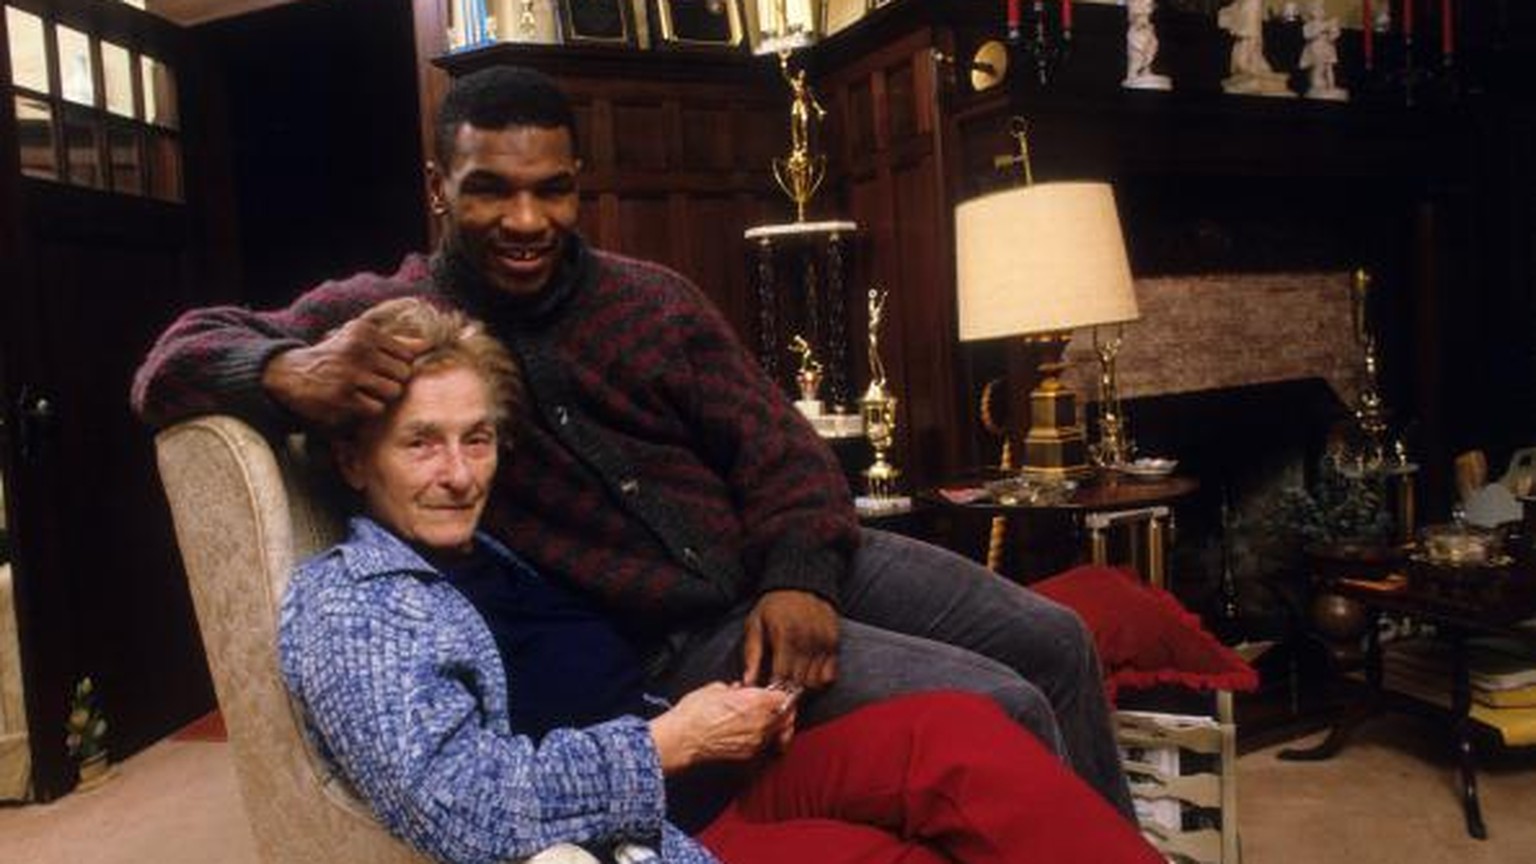 Boxing: Portrait of Mike Tyson with his surrogate mother, Camille Ewald, during photo shoot in her house.
Catskill, NY 12/1/1985
CREDIT: Manny Millan (Photo by Manny Millan /Sports Illustrated via Get ...